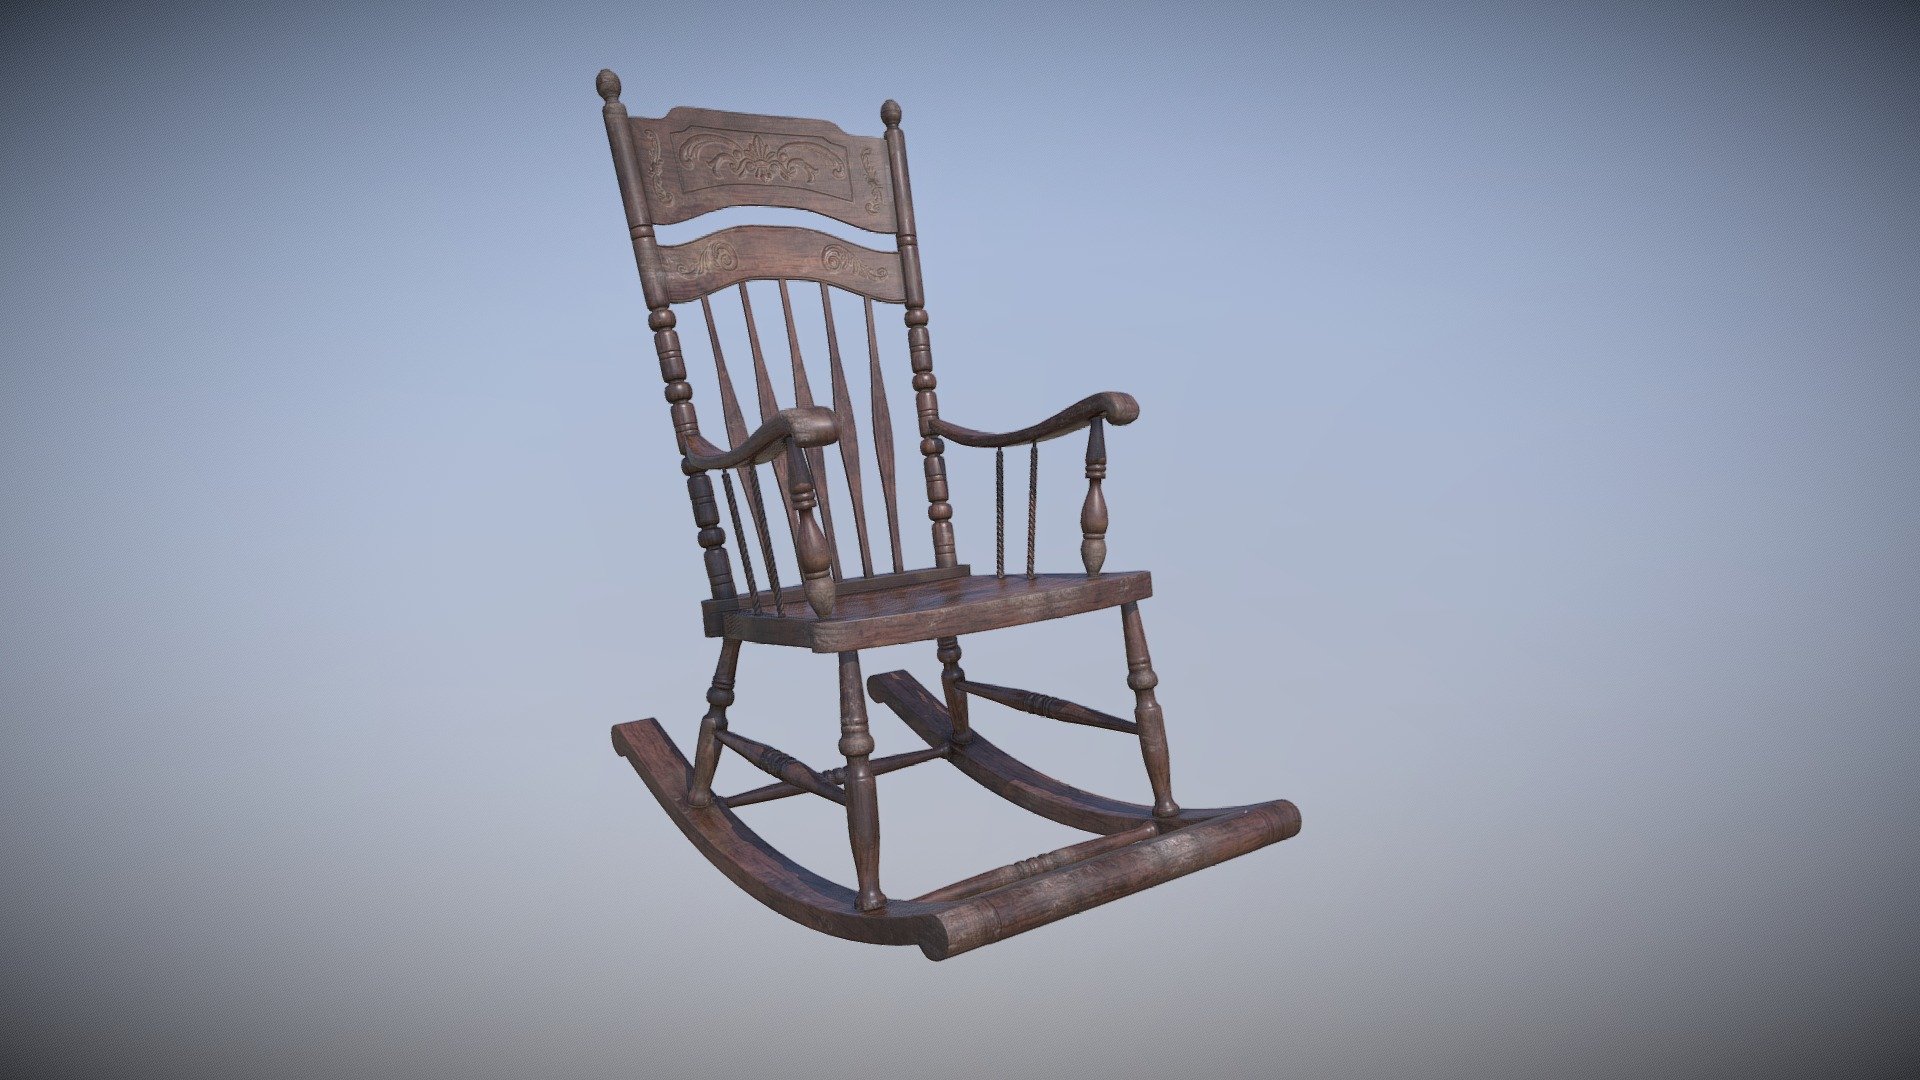 This is an old rocking chair based on designs of early 1900s. Modelled with Blender and textured with Substance Painter. 
Appropriate for vintage style archviz scenes.
obj and original blend files included 3d model